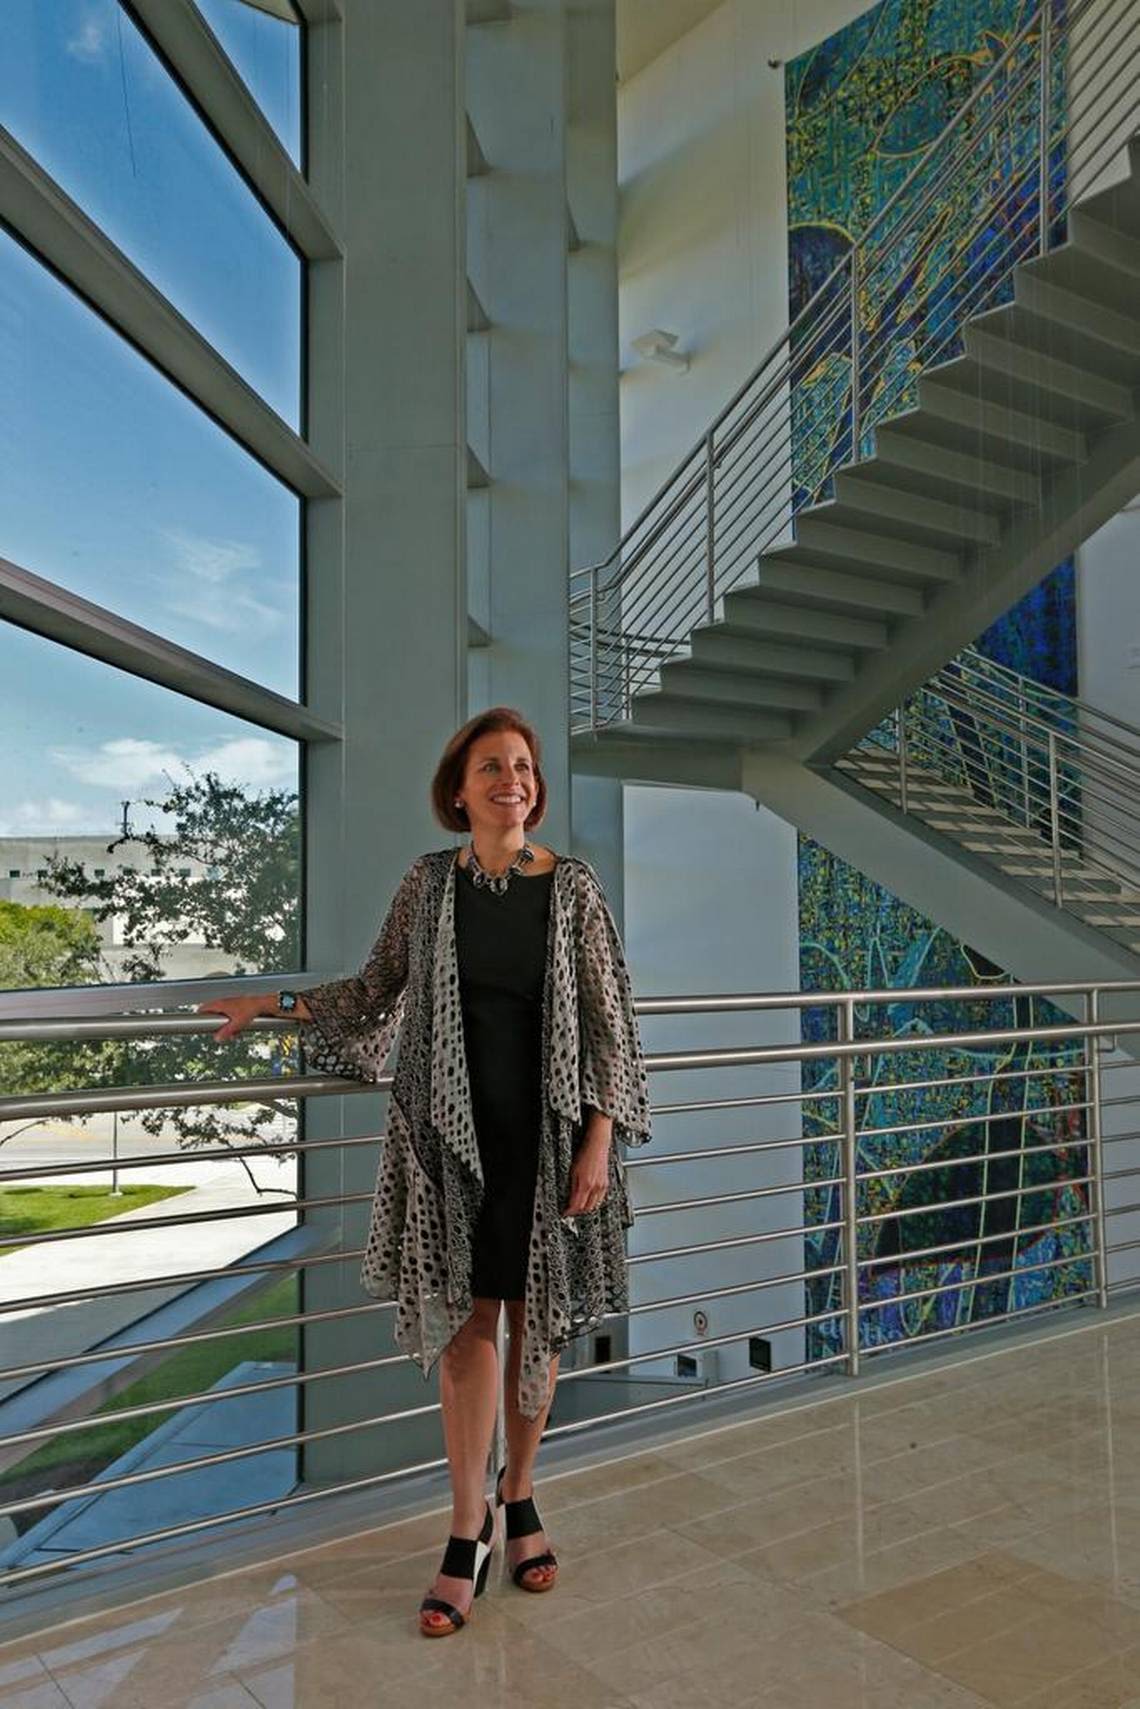 After more than nine years, FIU’s Frost Art Museum director is leaving